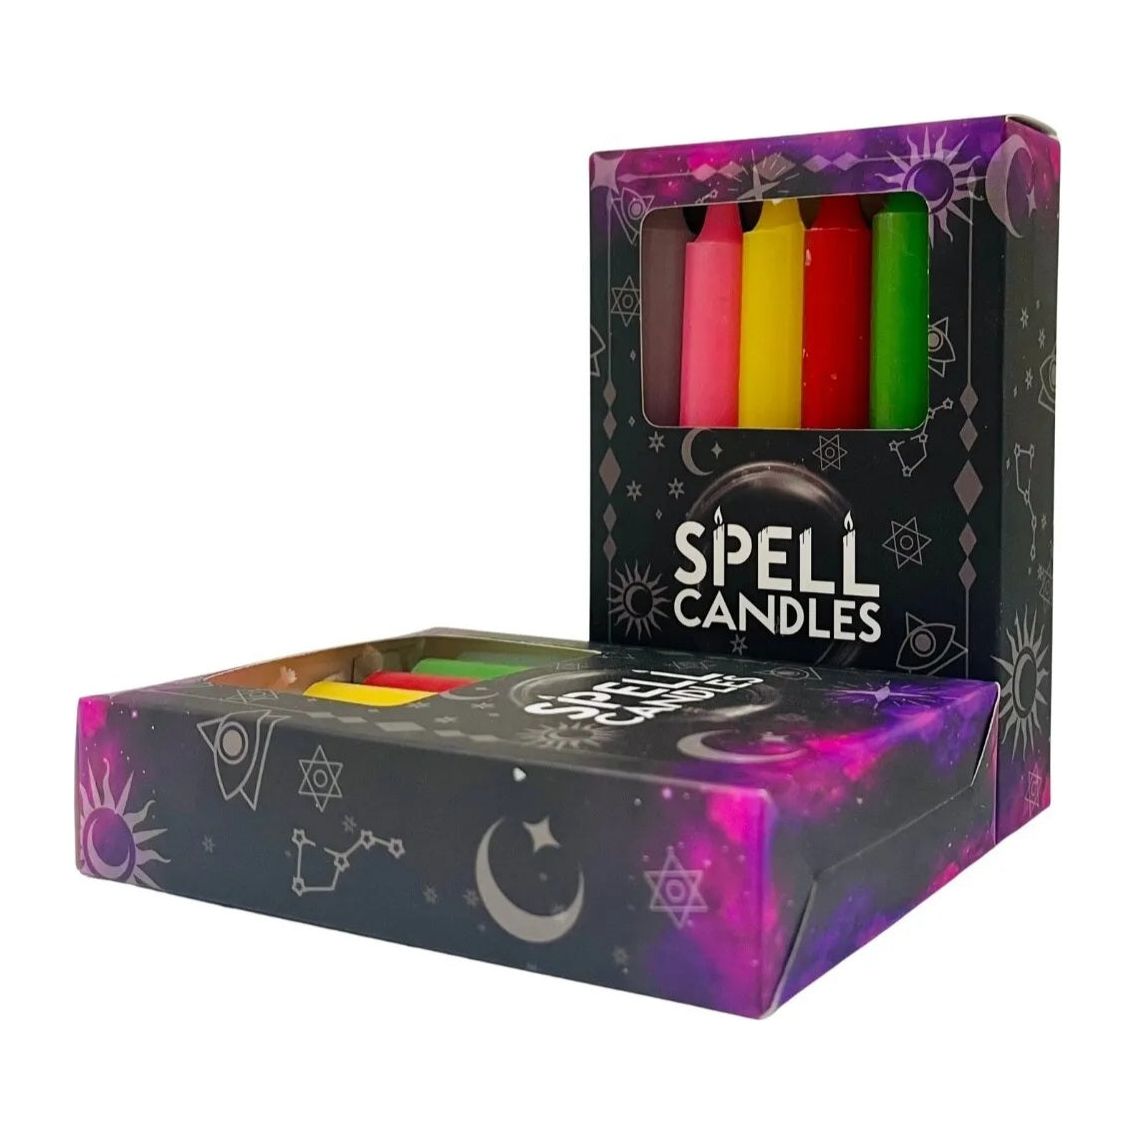 SPELL CANDLES